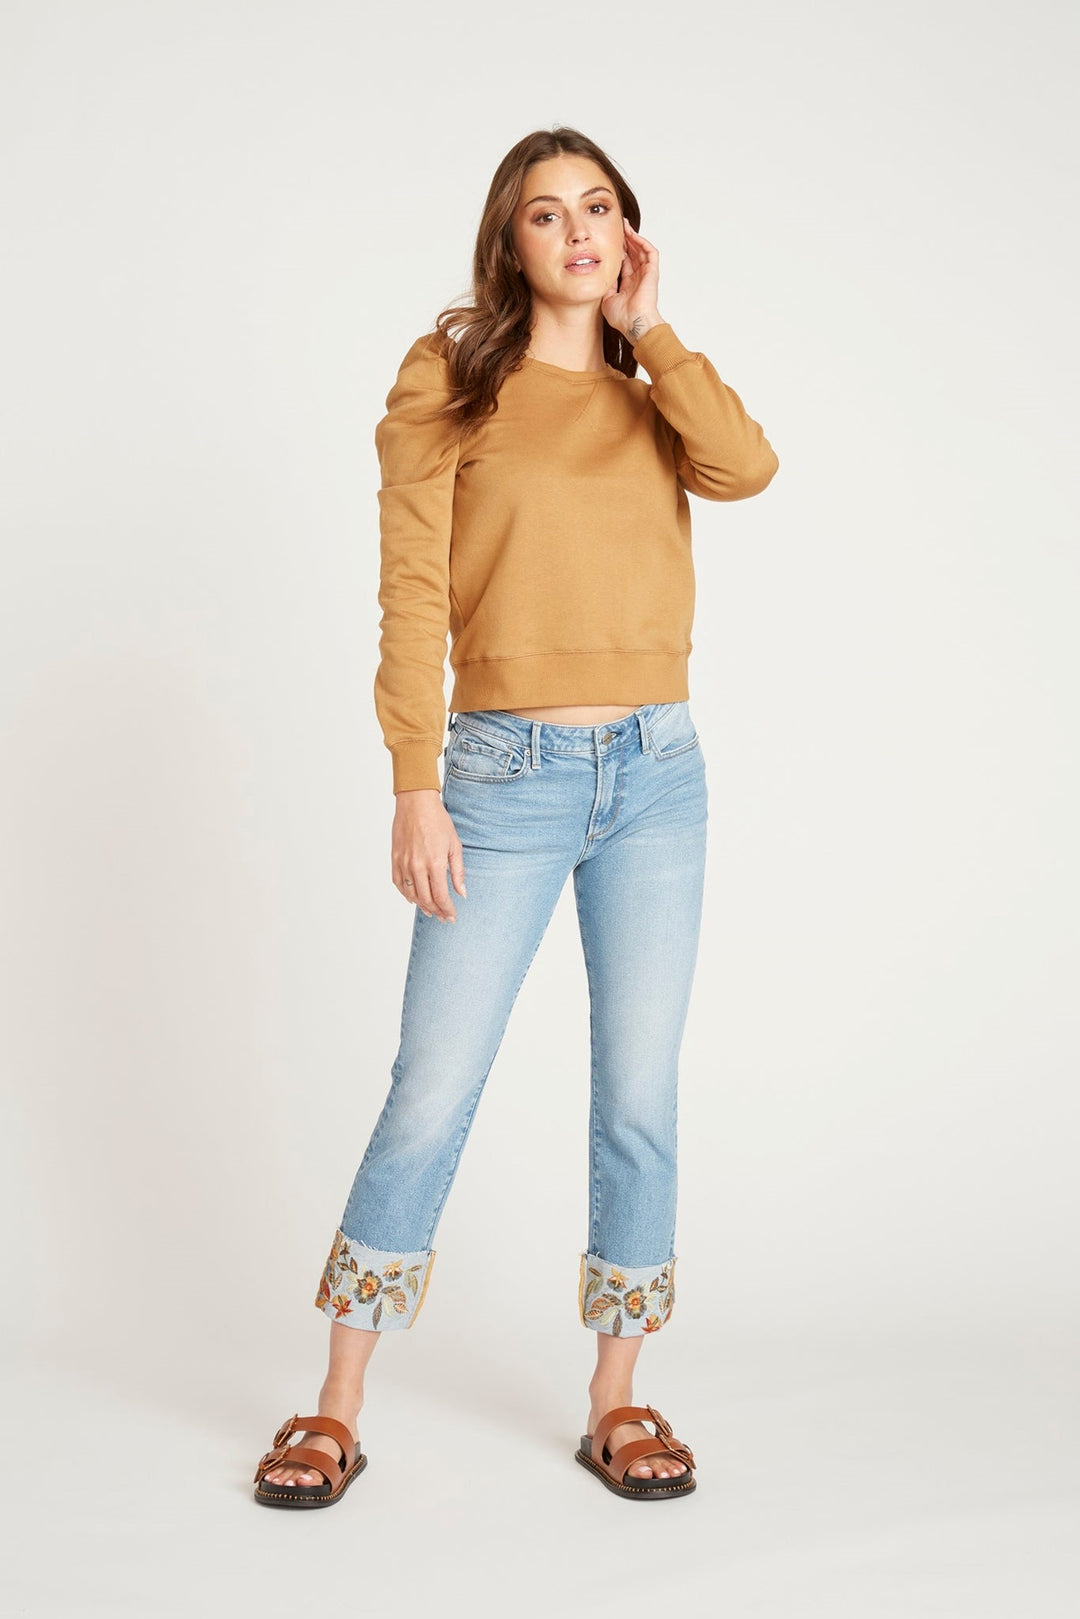 Driftwood Collette Feathery Leaf Crop Jean